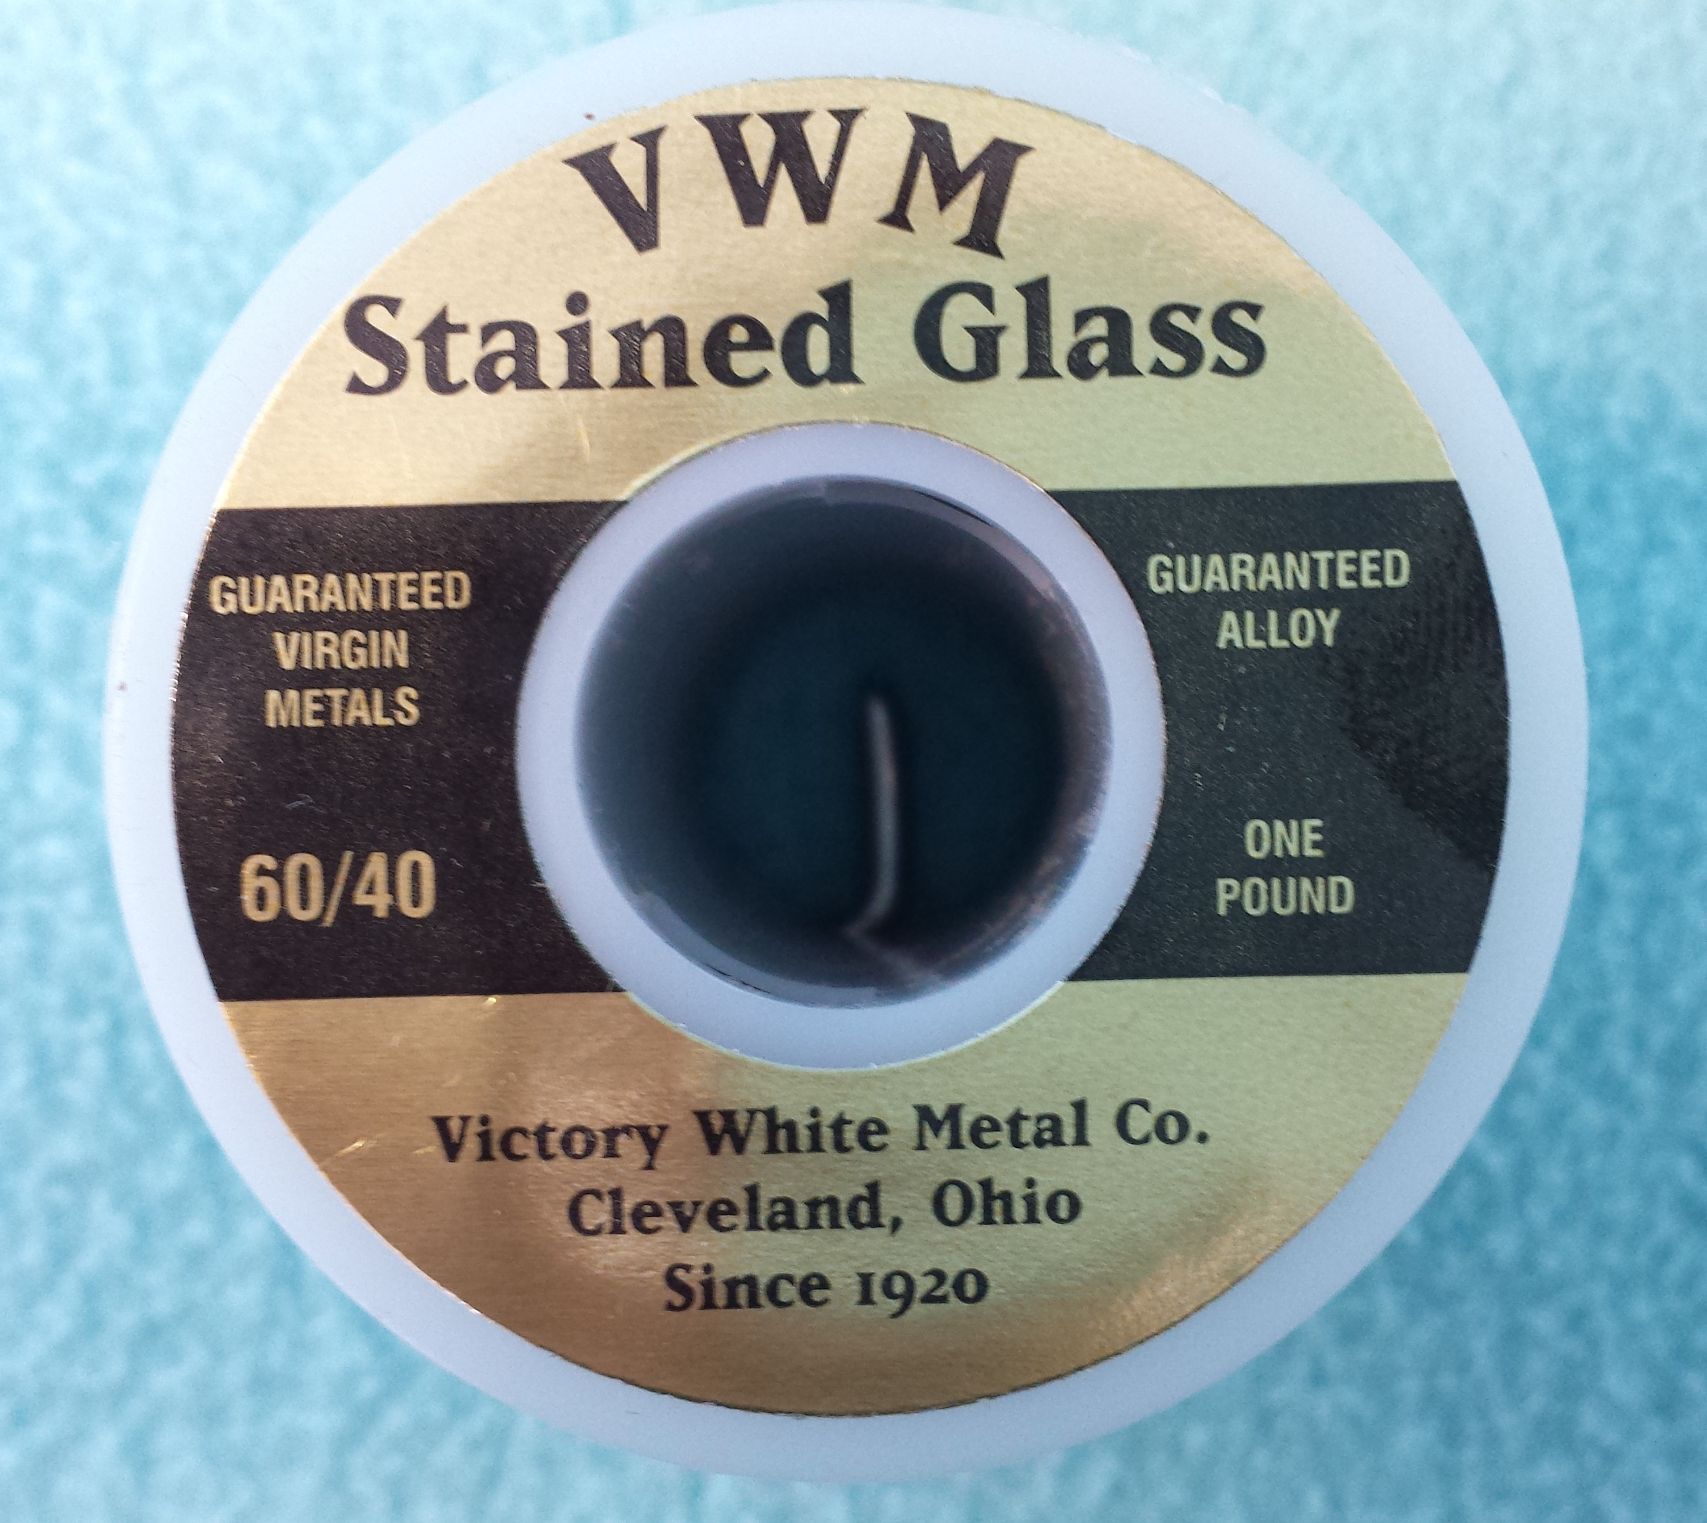 VWM Stained Glass 60/40 Solder